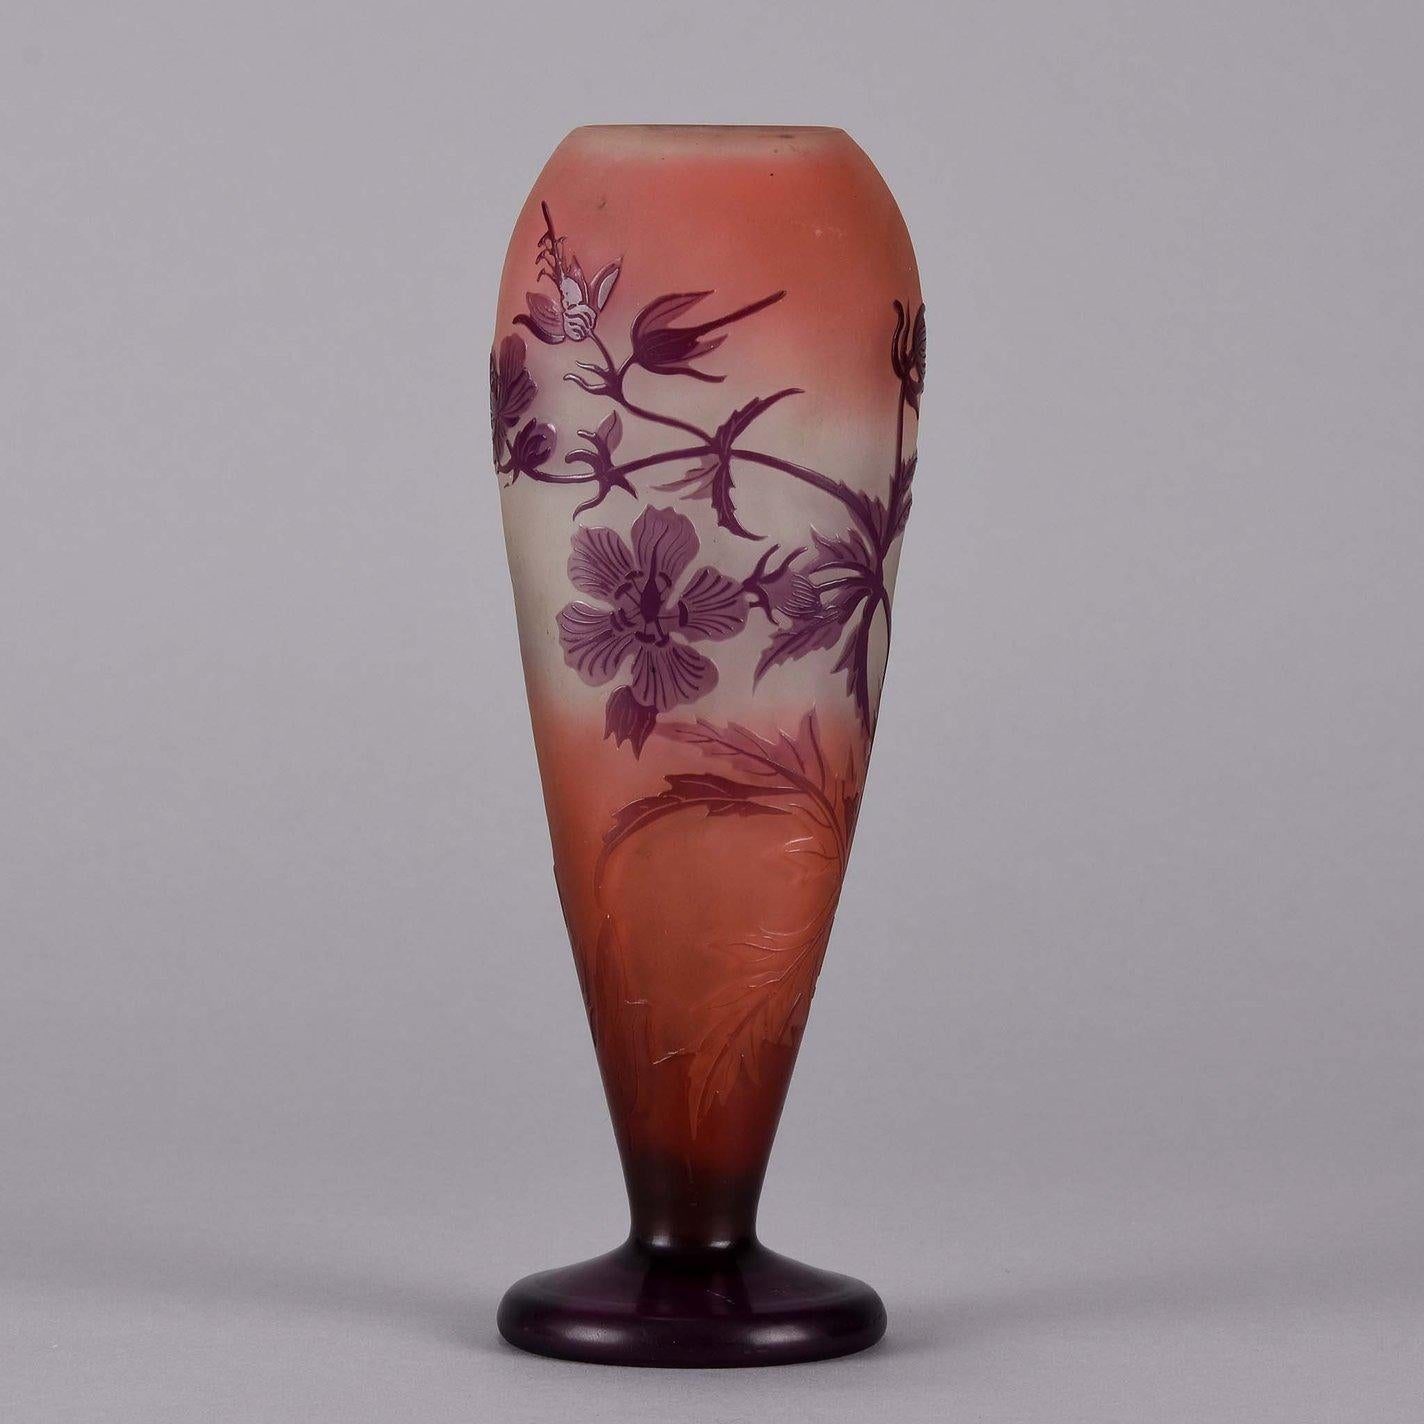 Delightful Art Nouveau French cameo glass vase overlaid with decorative pink and purple Floral design on a cream peach field. A very fine vase exhibiting excellent color and detail, signed Gallé

Emile Gallé, 1846–1904 is considered a driving